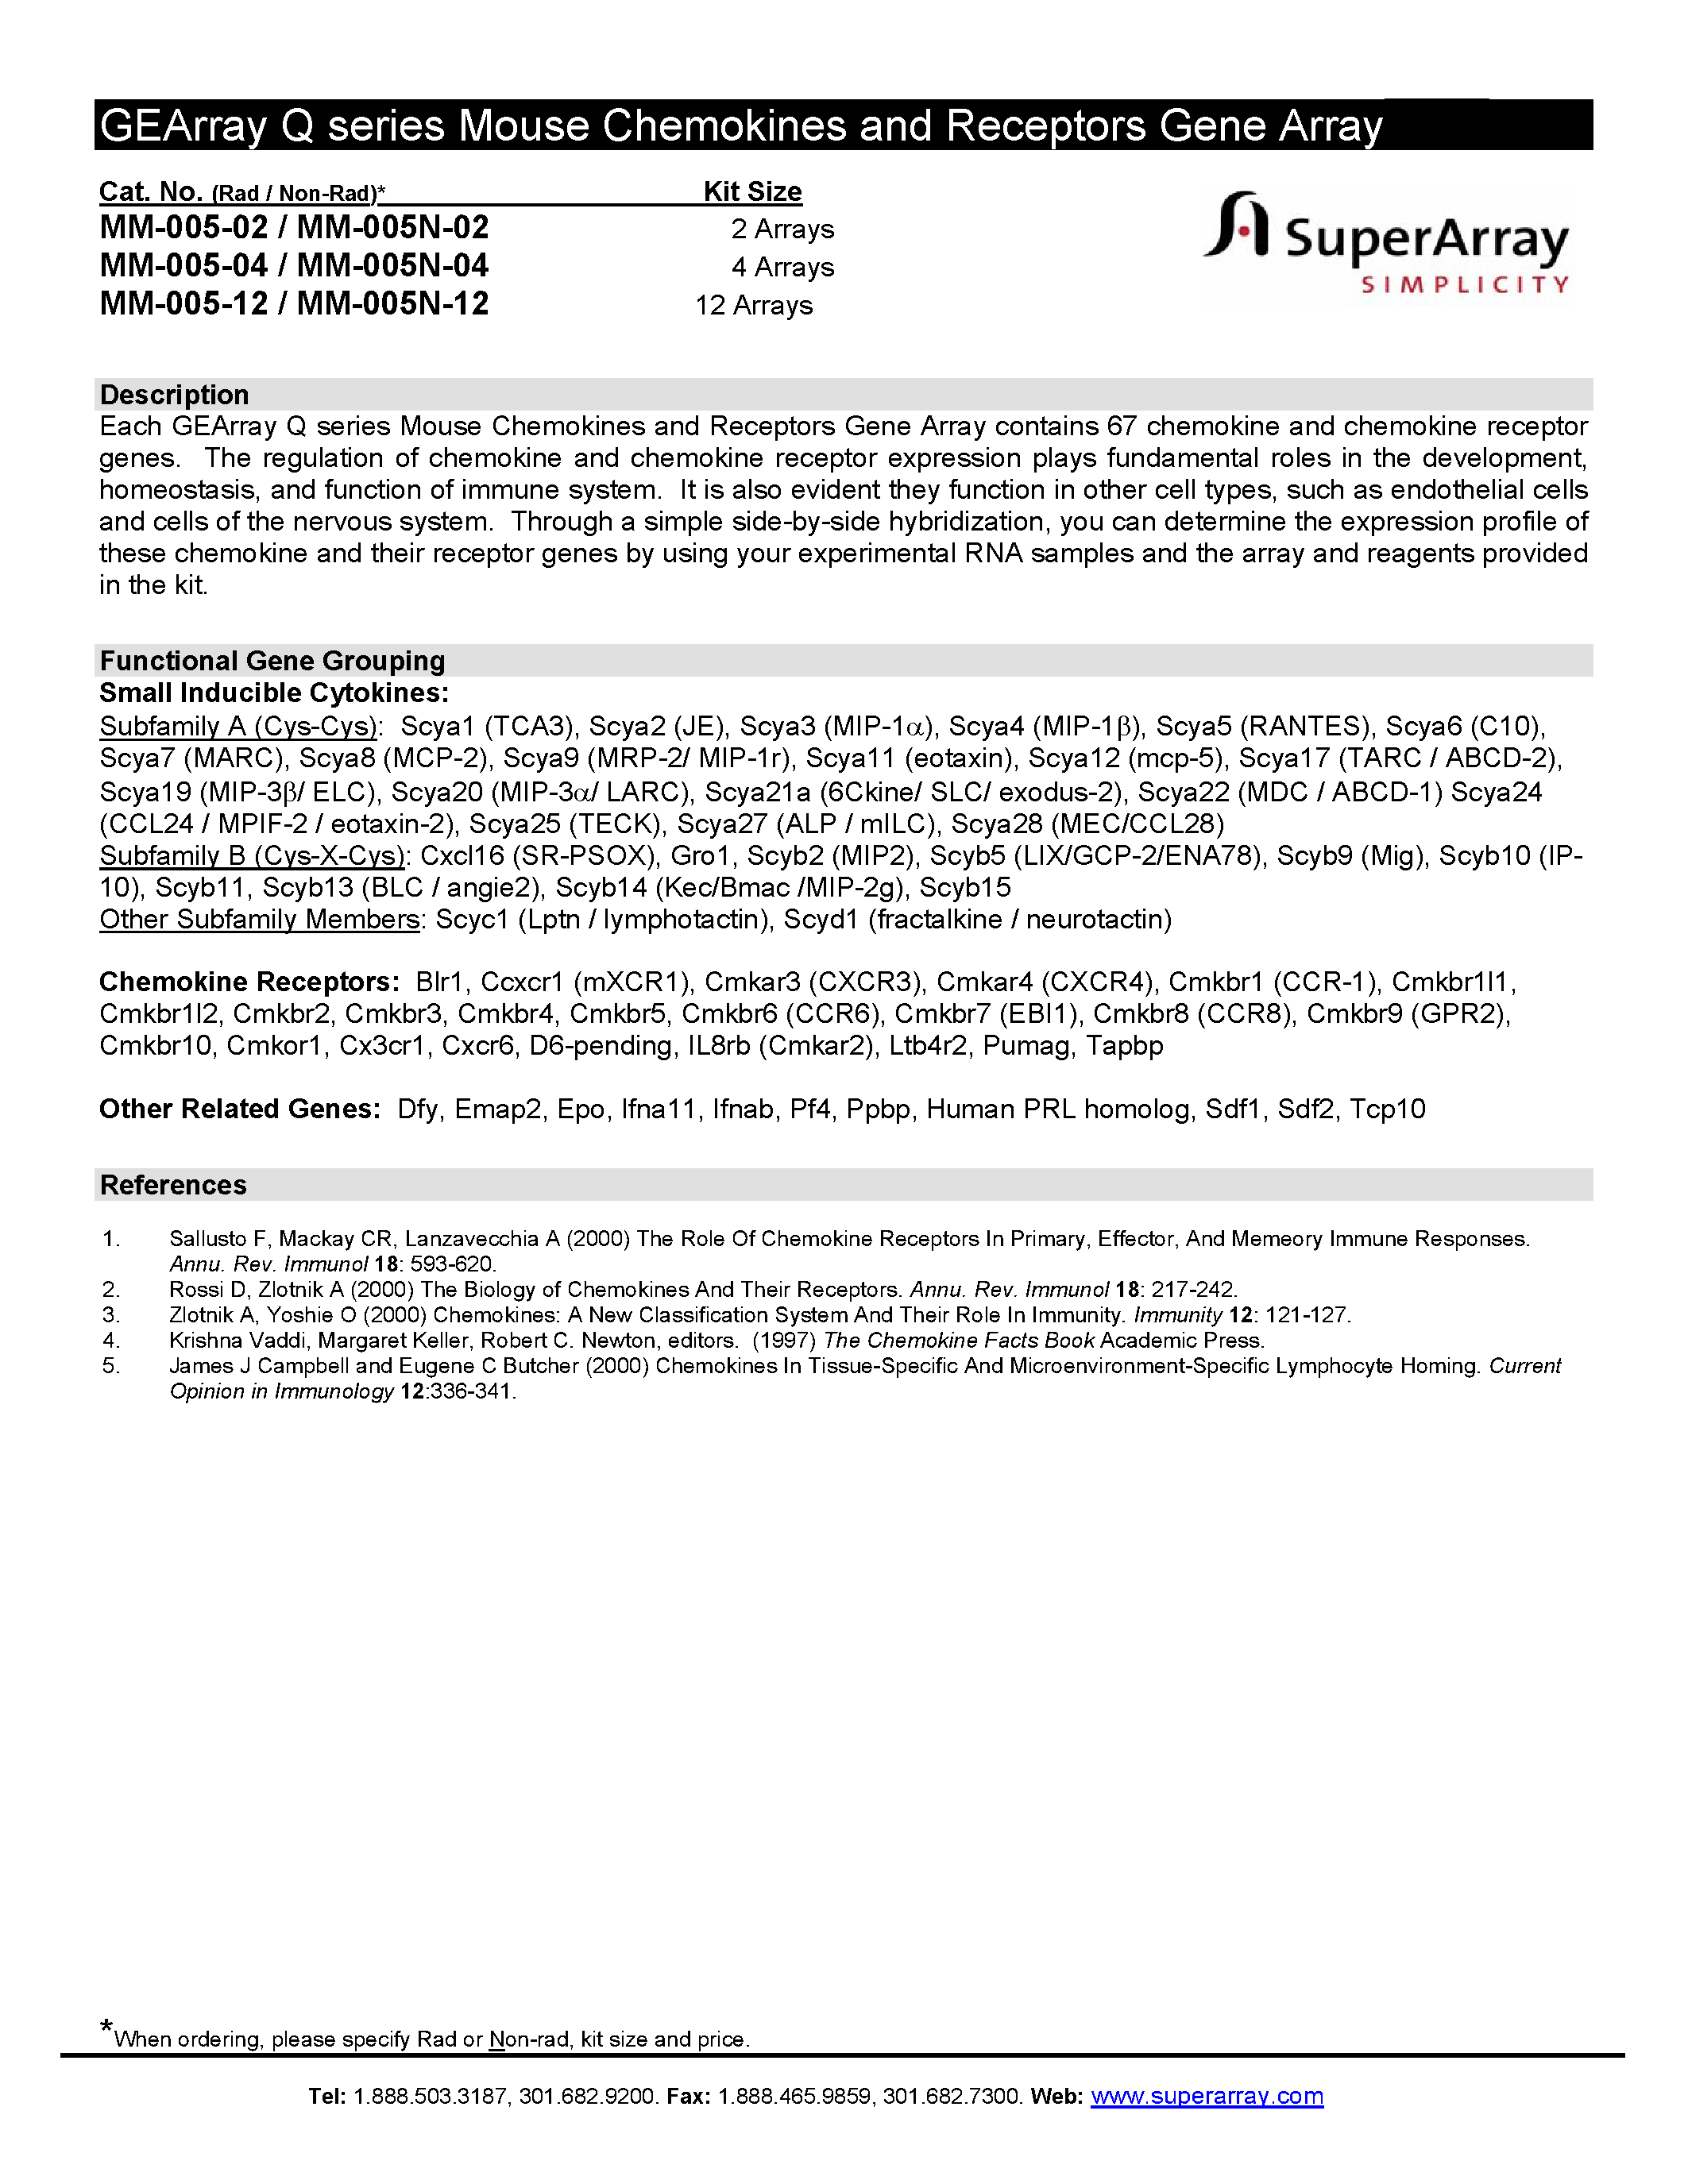 Datasheet MM-005-04 - GEArray Q series Mouse Chemokines and Receptors Gene Array page 1